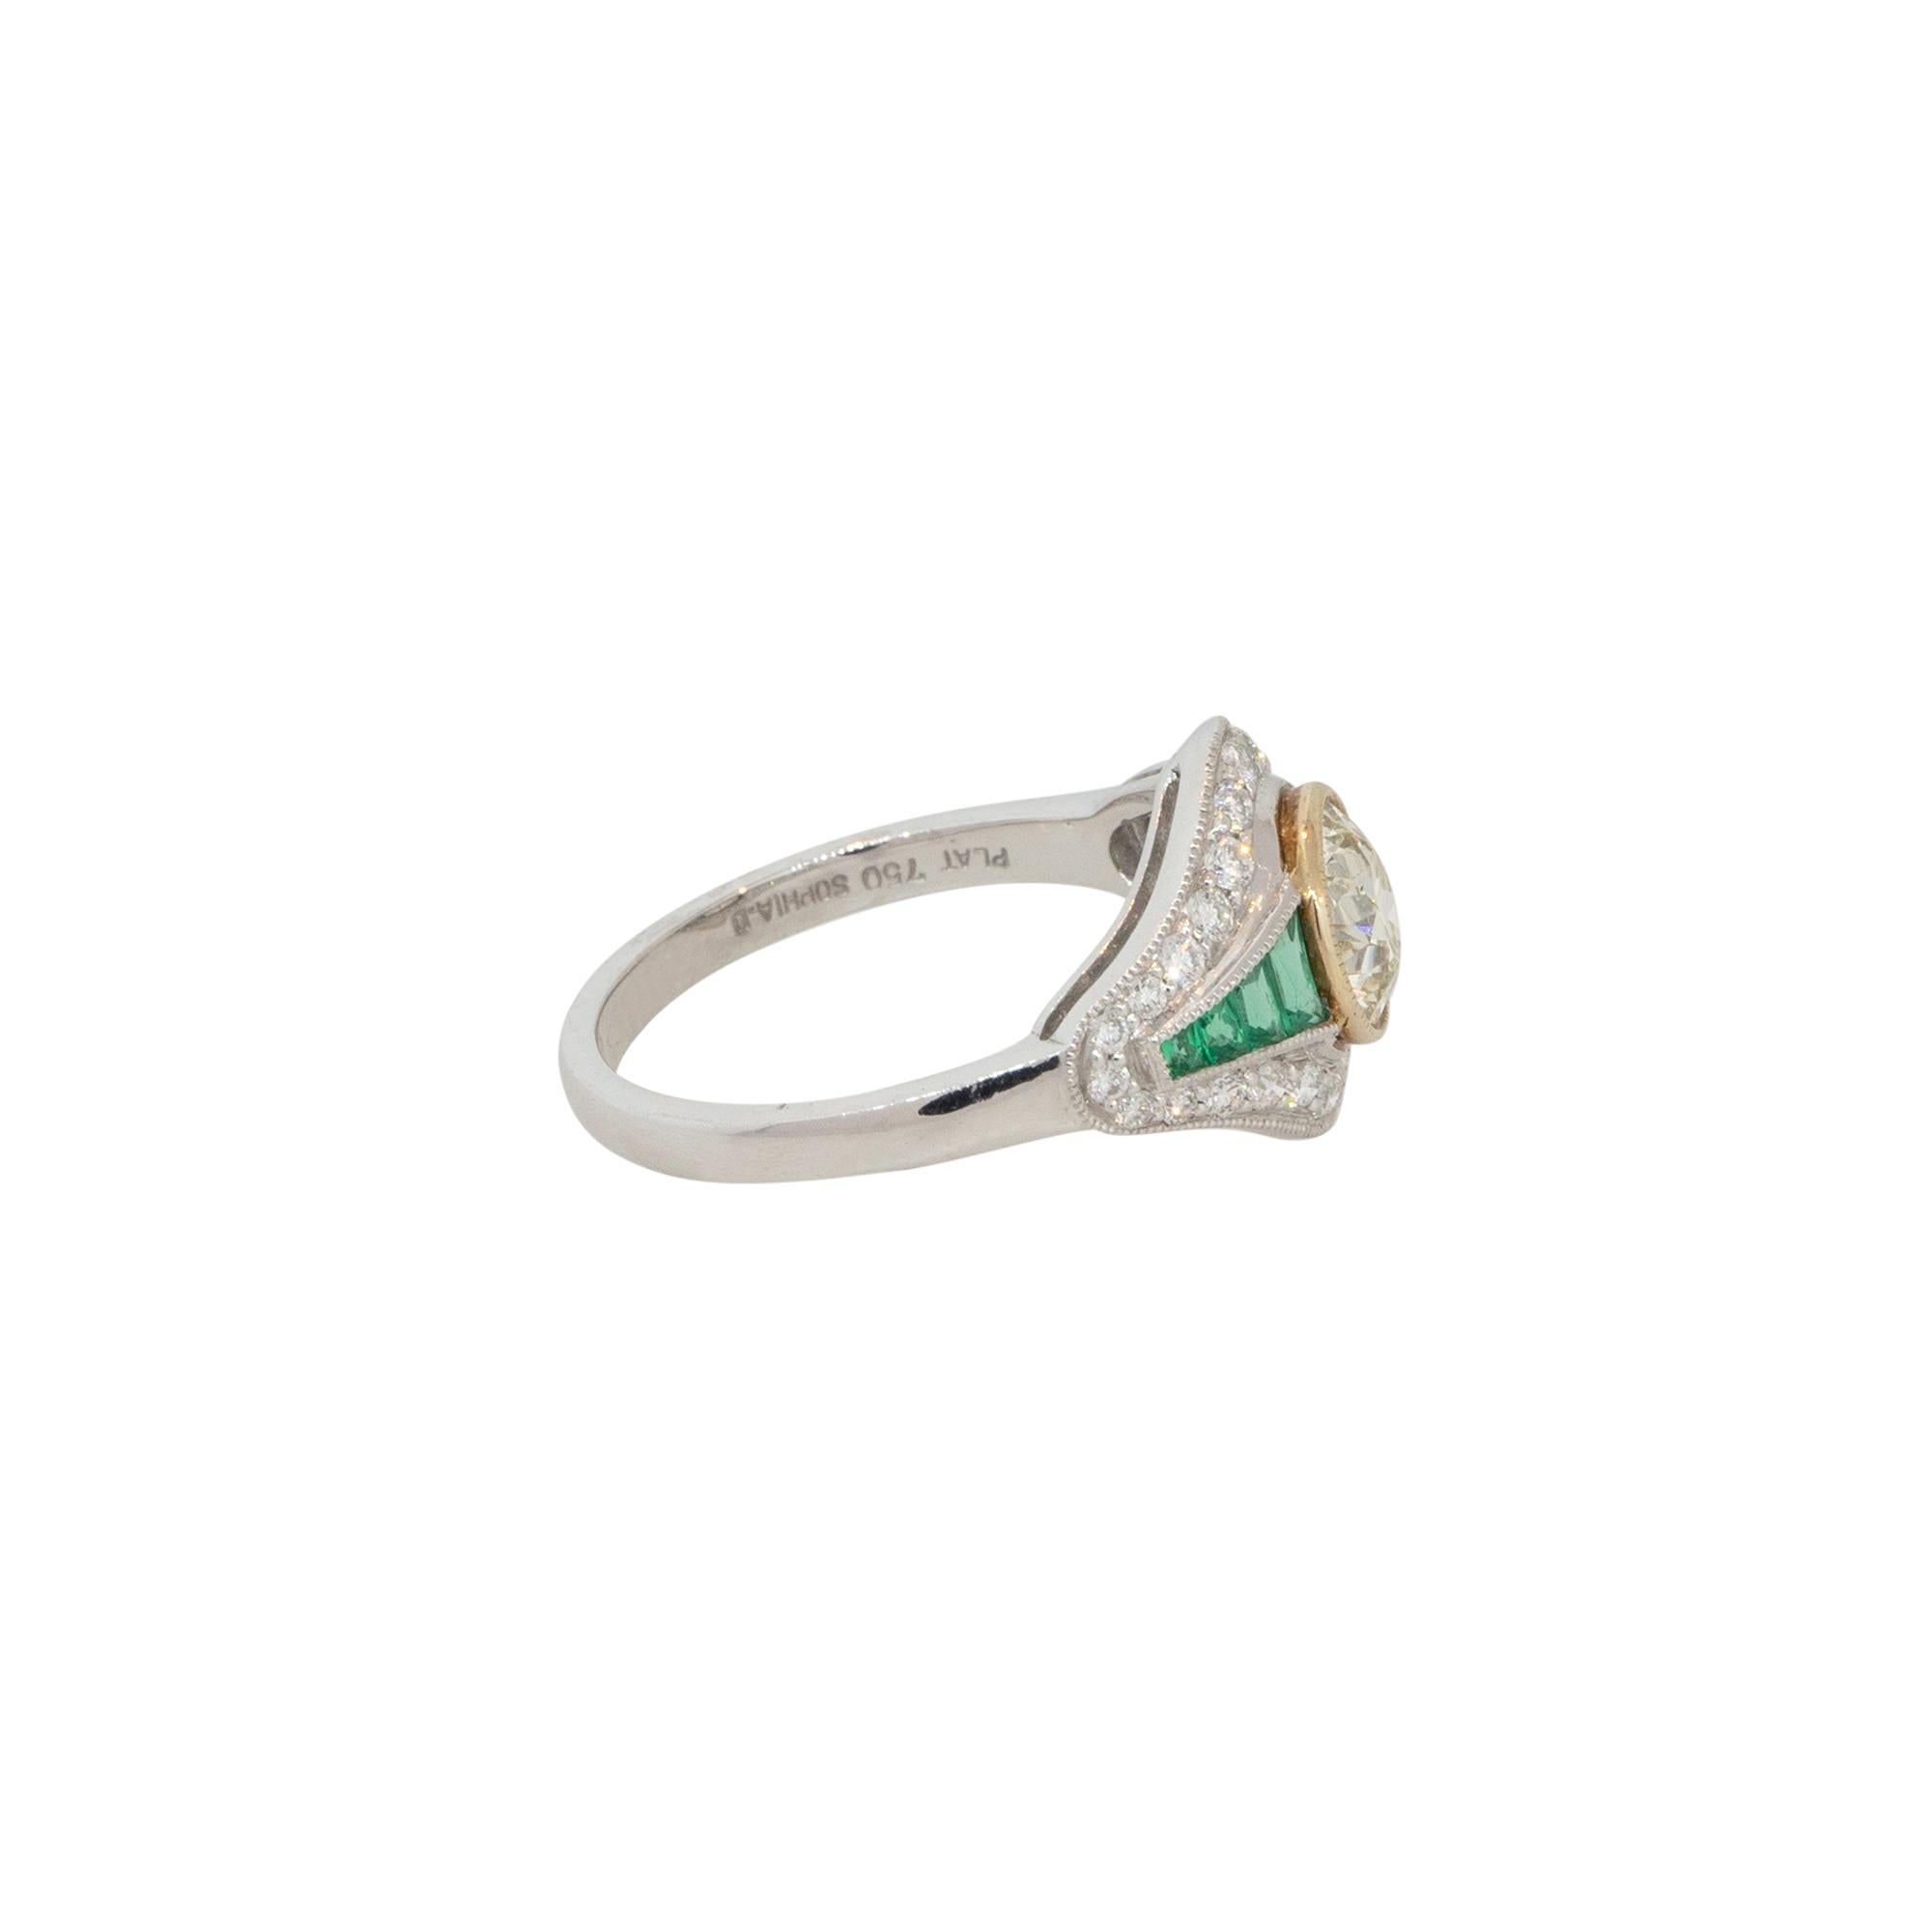 Round Cut 1.46 Carat Diamond and Emerald Art Deco Style Ring Platinum in Stock For Sale